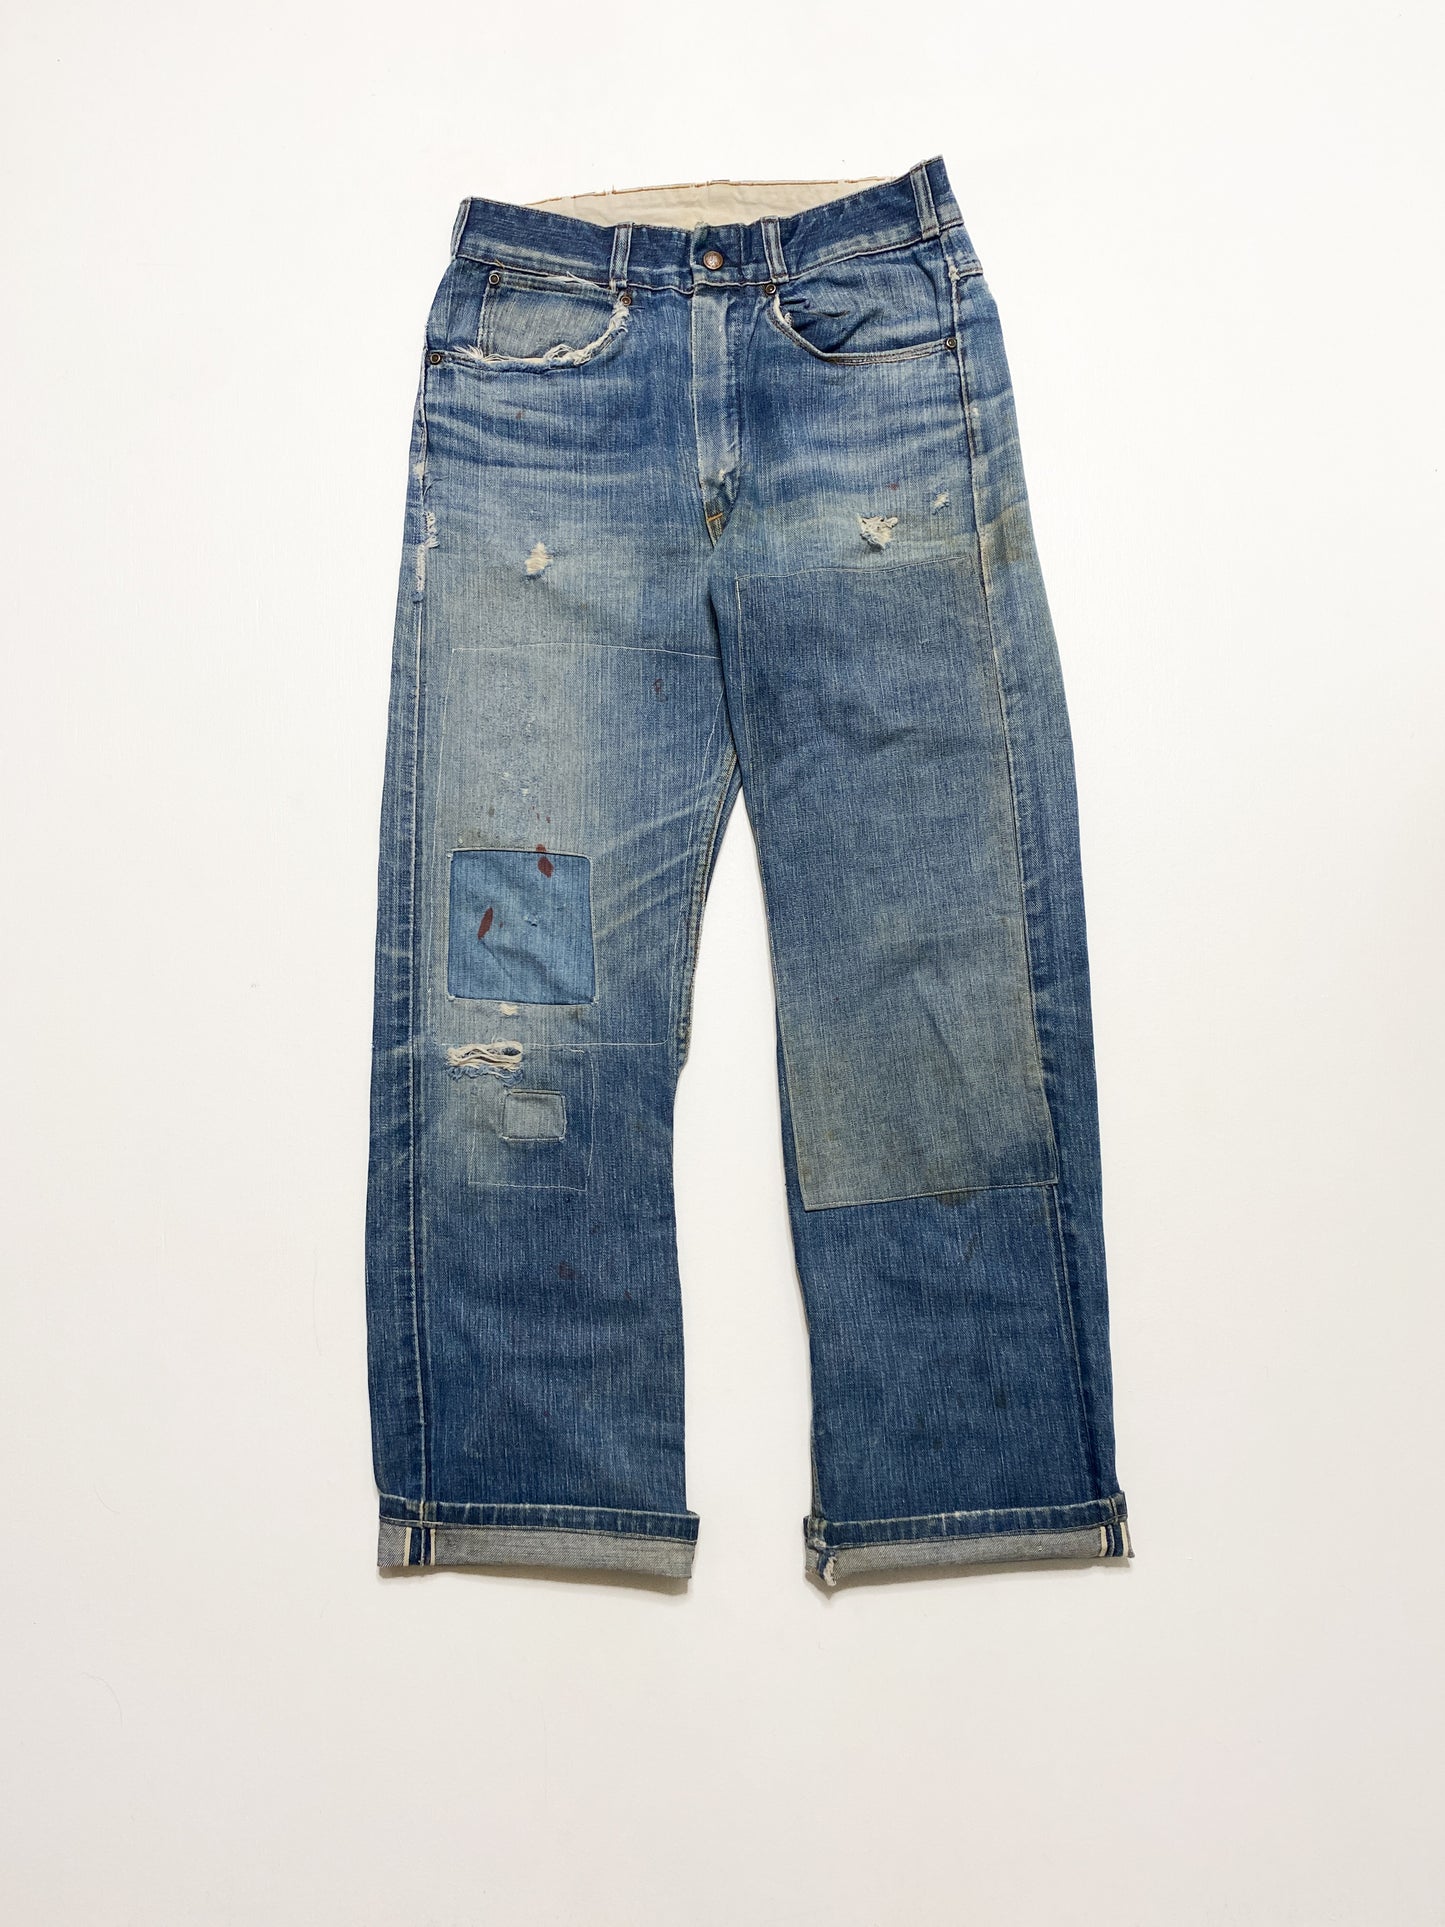 1950’s Unbranded Selvedge Jeans